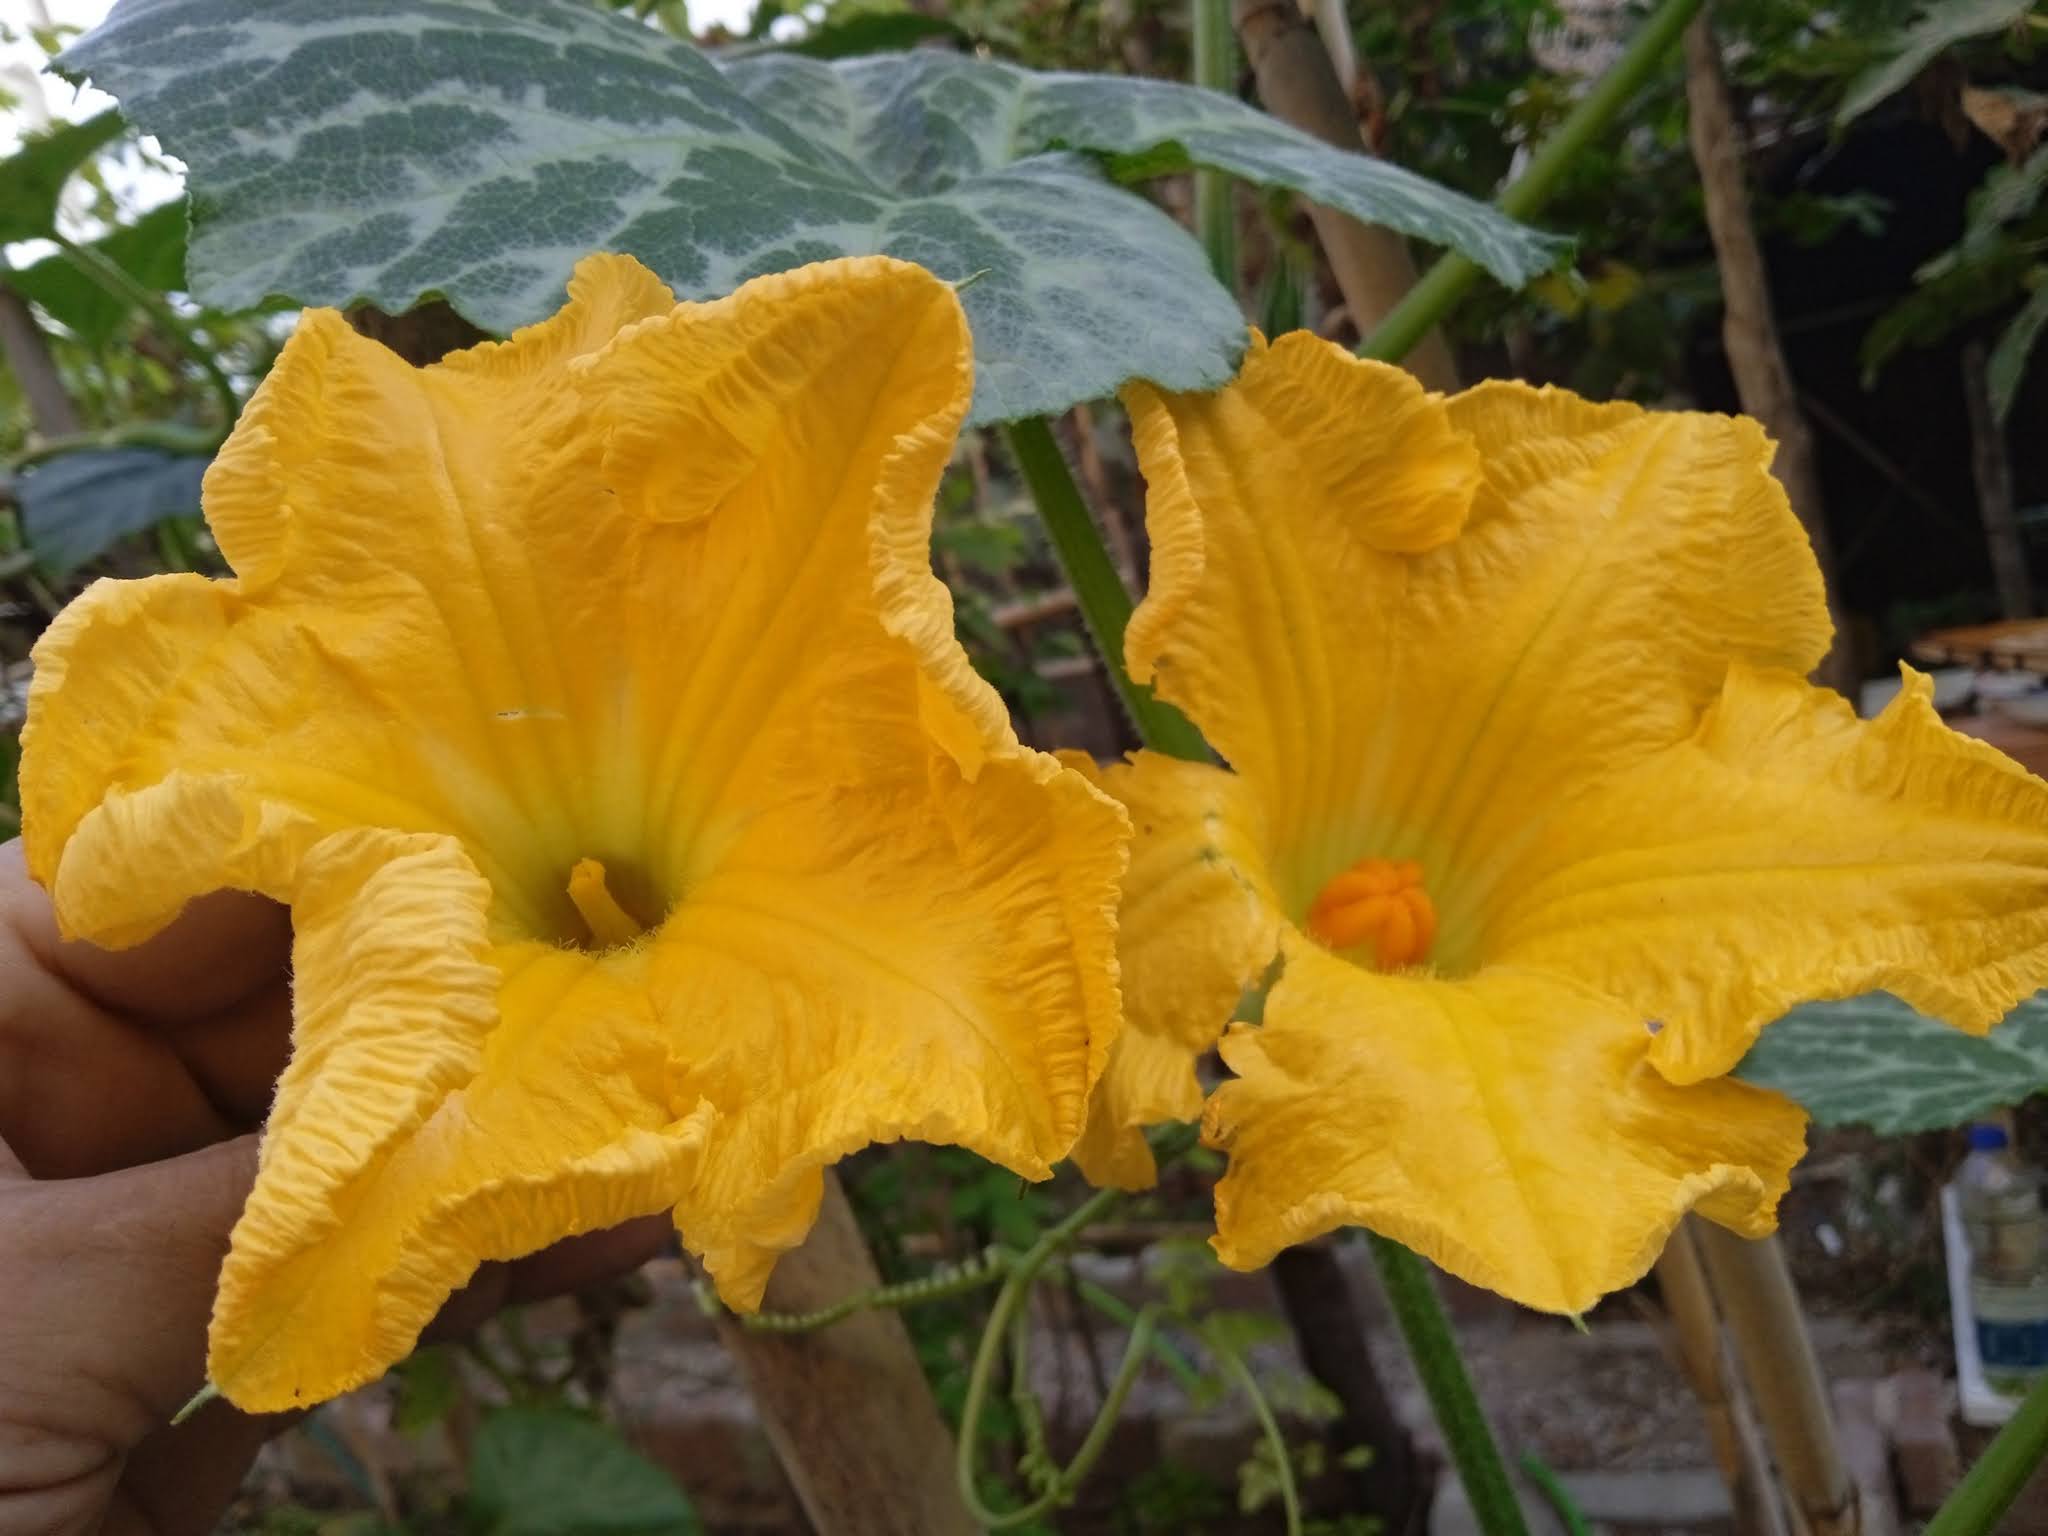 Hand pollinating squash flowers isn’t a difficult task, but it can be tedious. The first important step of hand pollination is to make sure your squash plants are producing both male and female flowers.